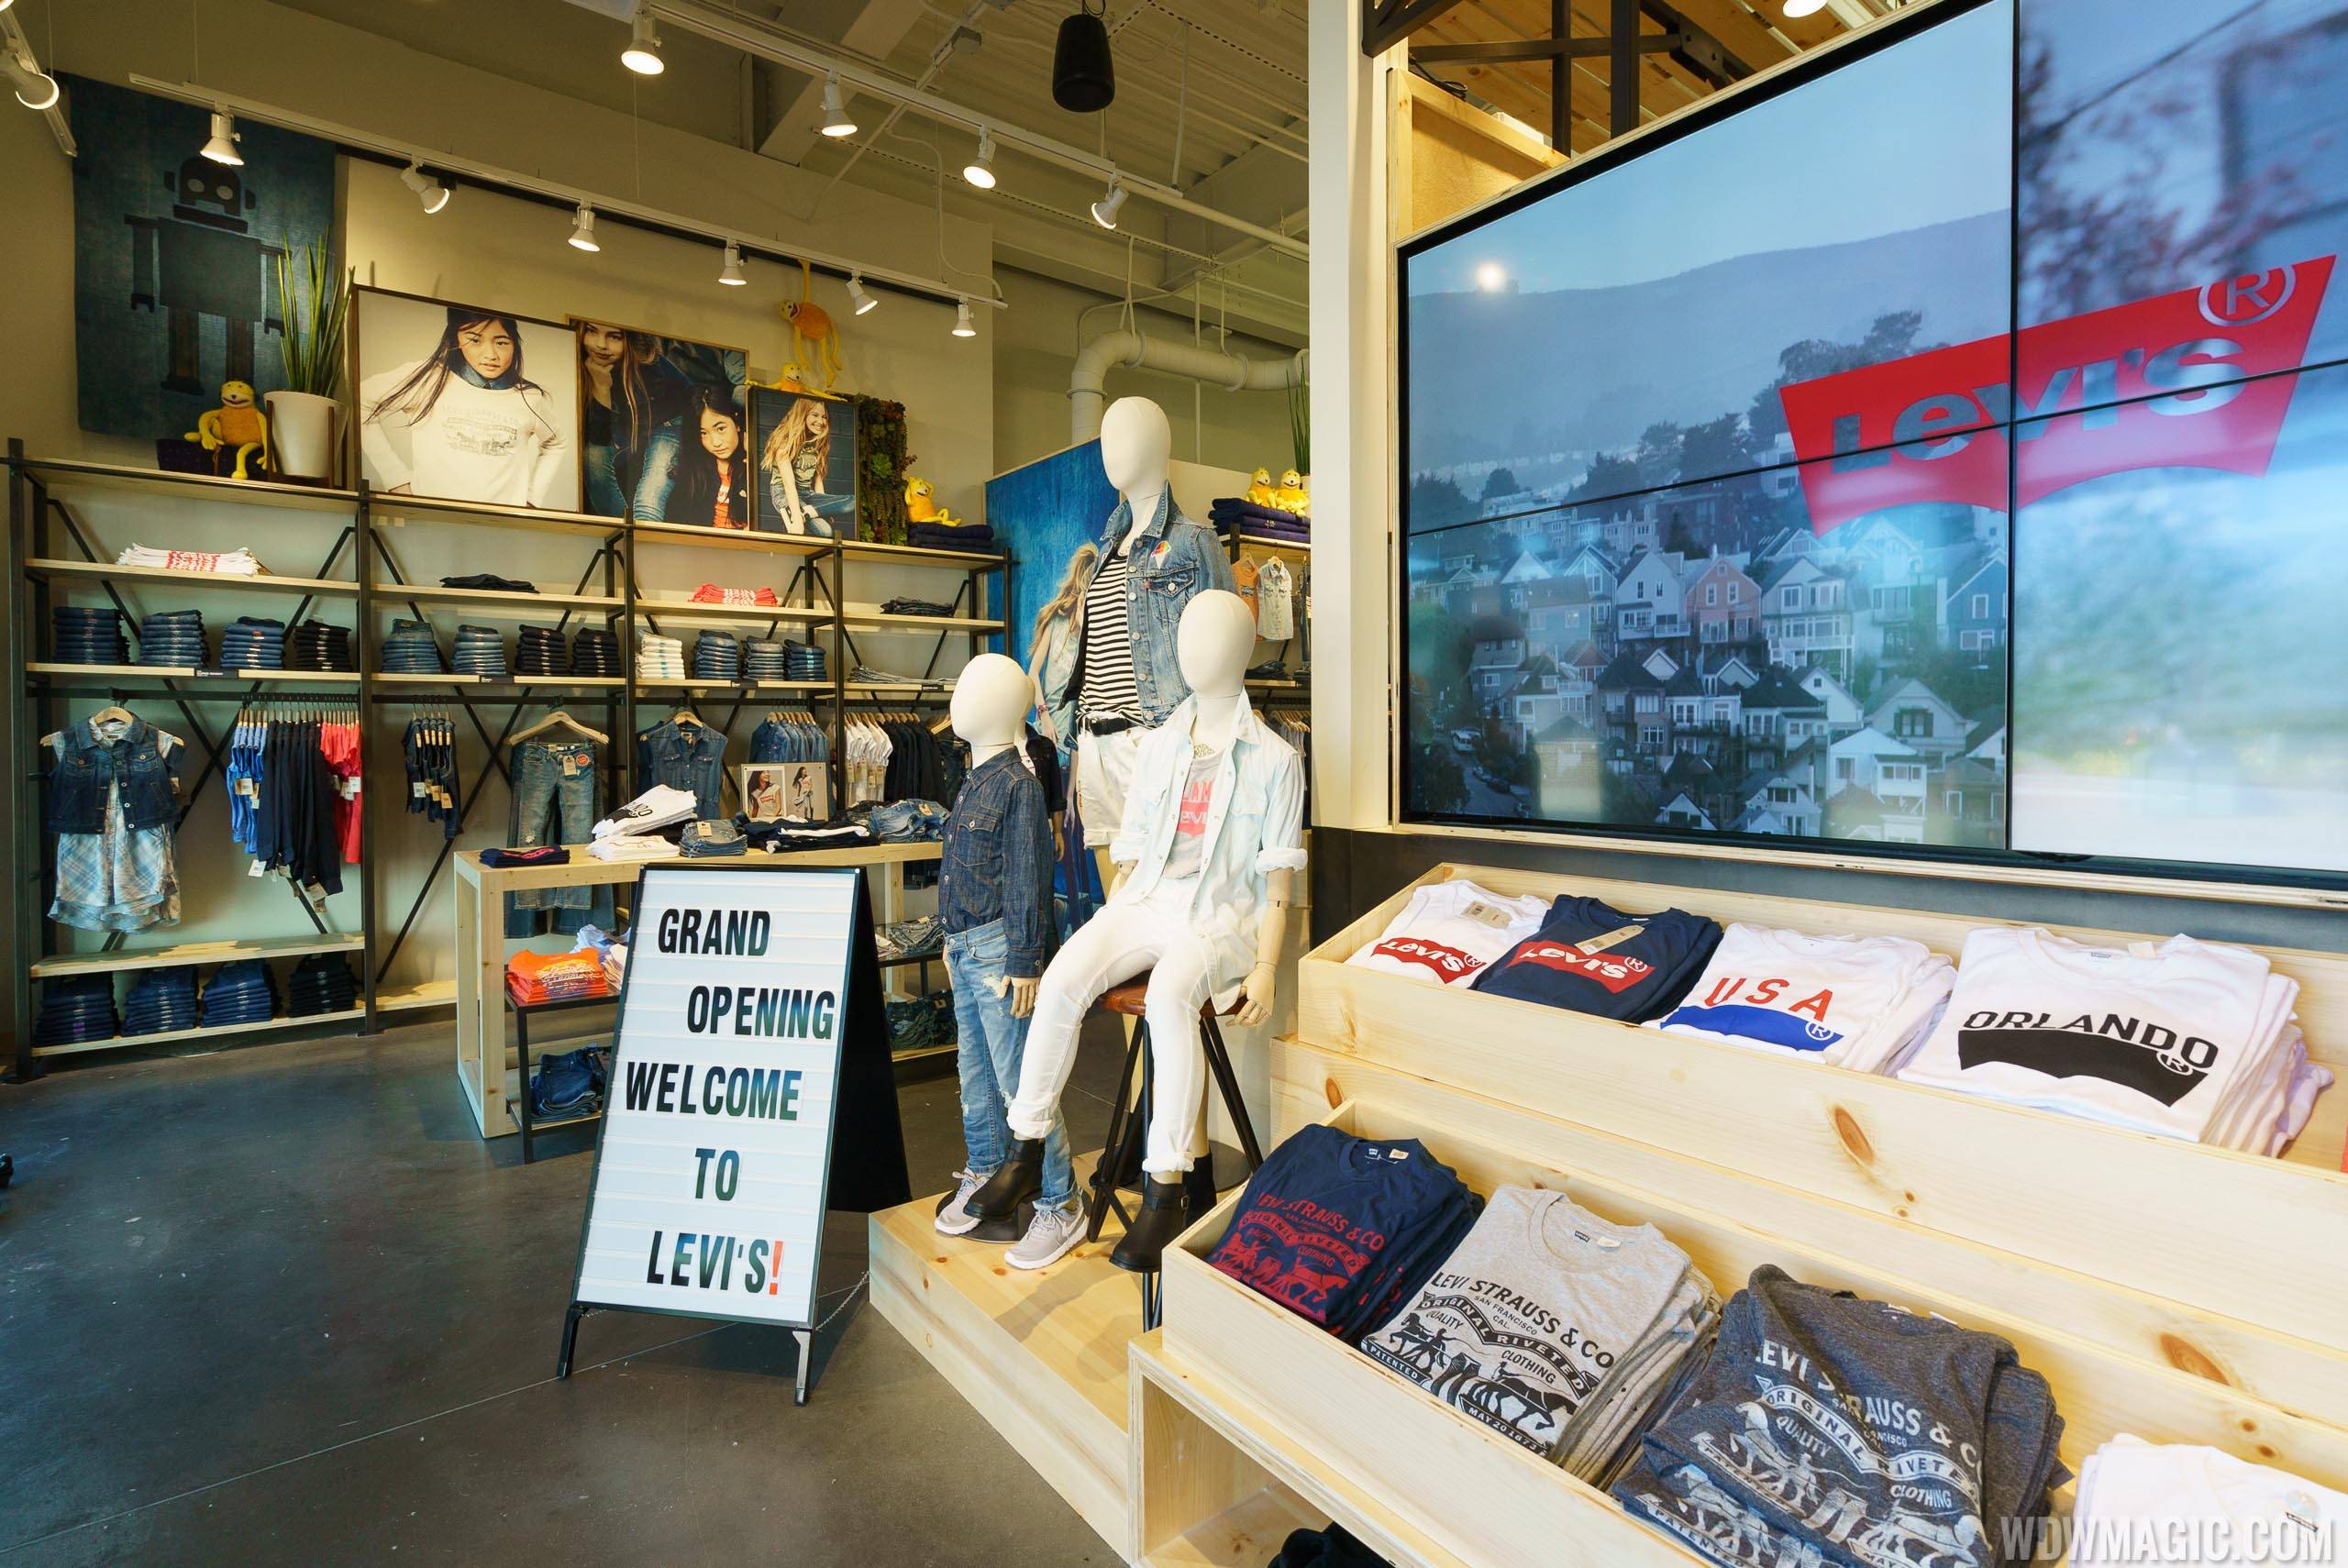 PHOTOS - Levi's in the Town Center at Disney Springs